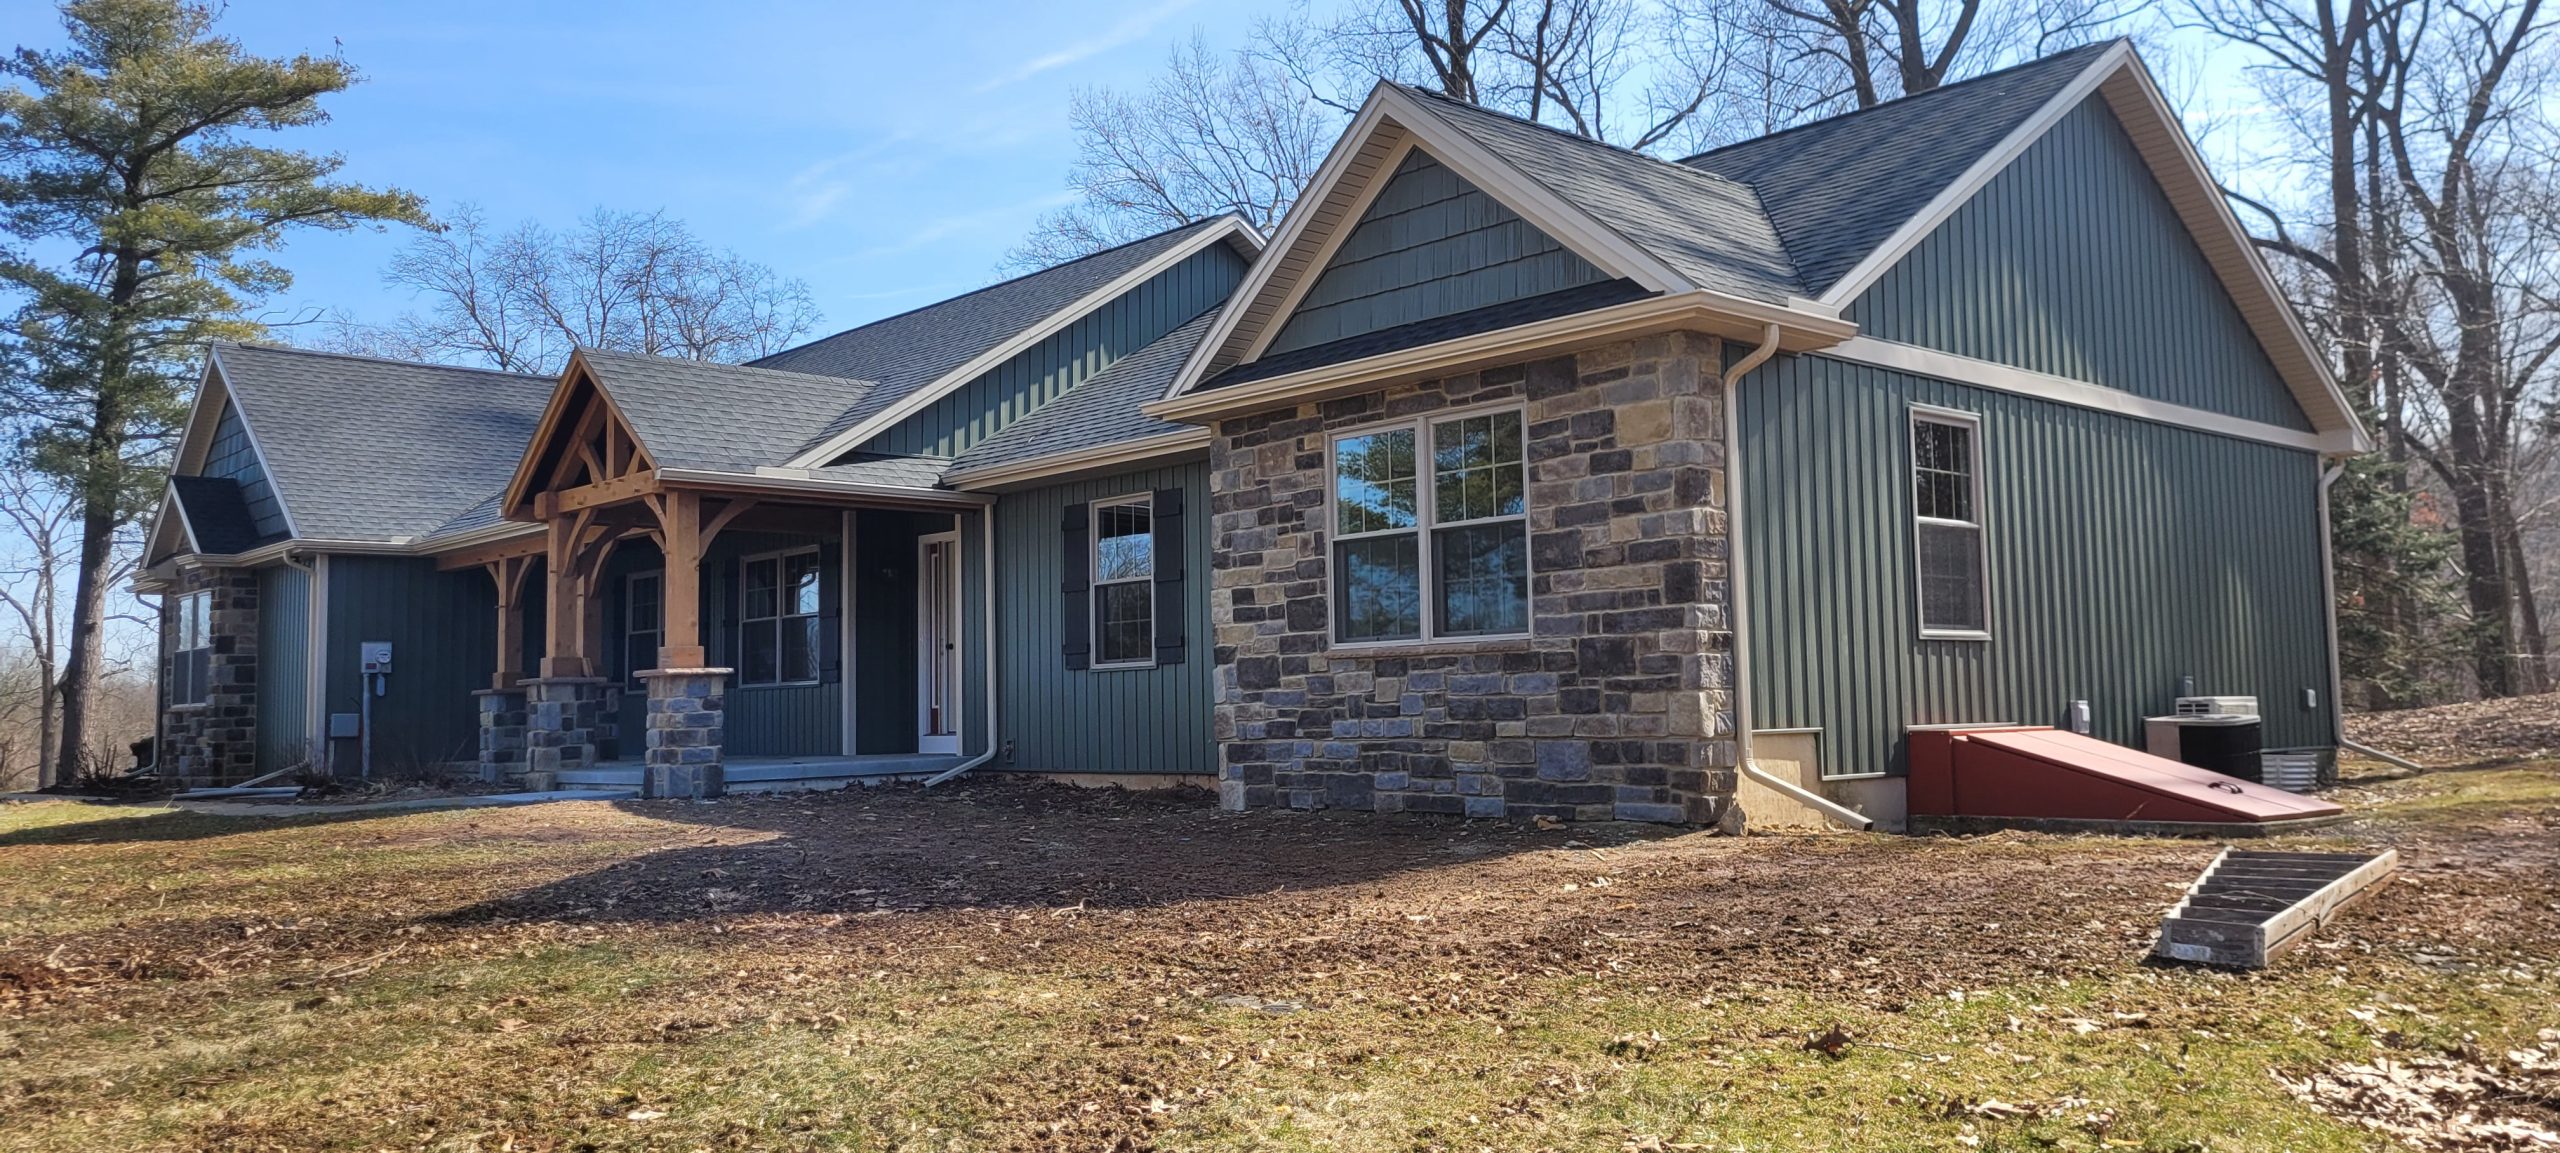 Photo of home front exterior after remodel with green vinyl siding, stone siding accents, white trim, and black shutters.